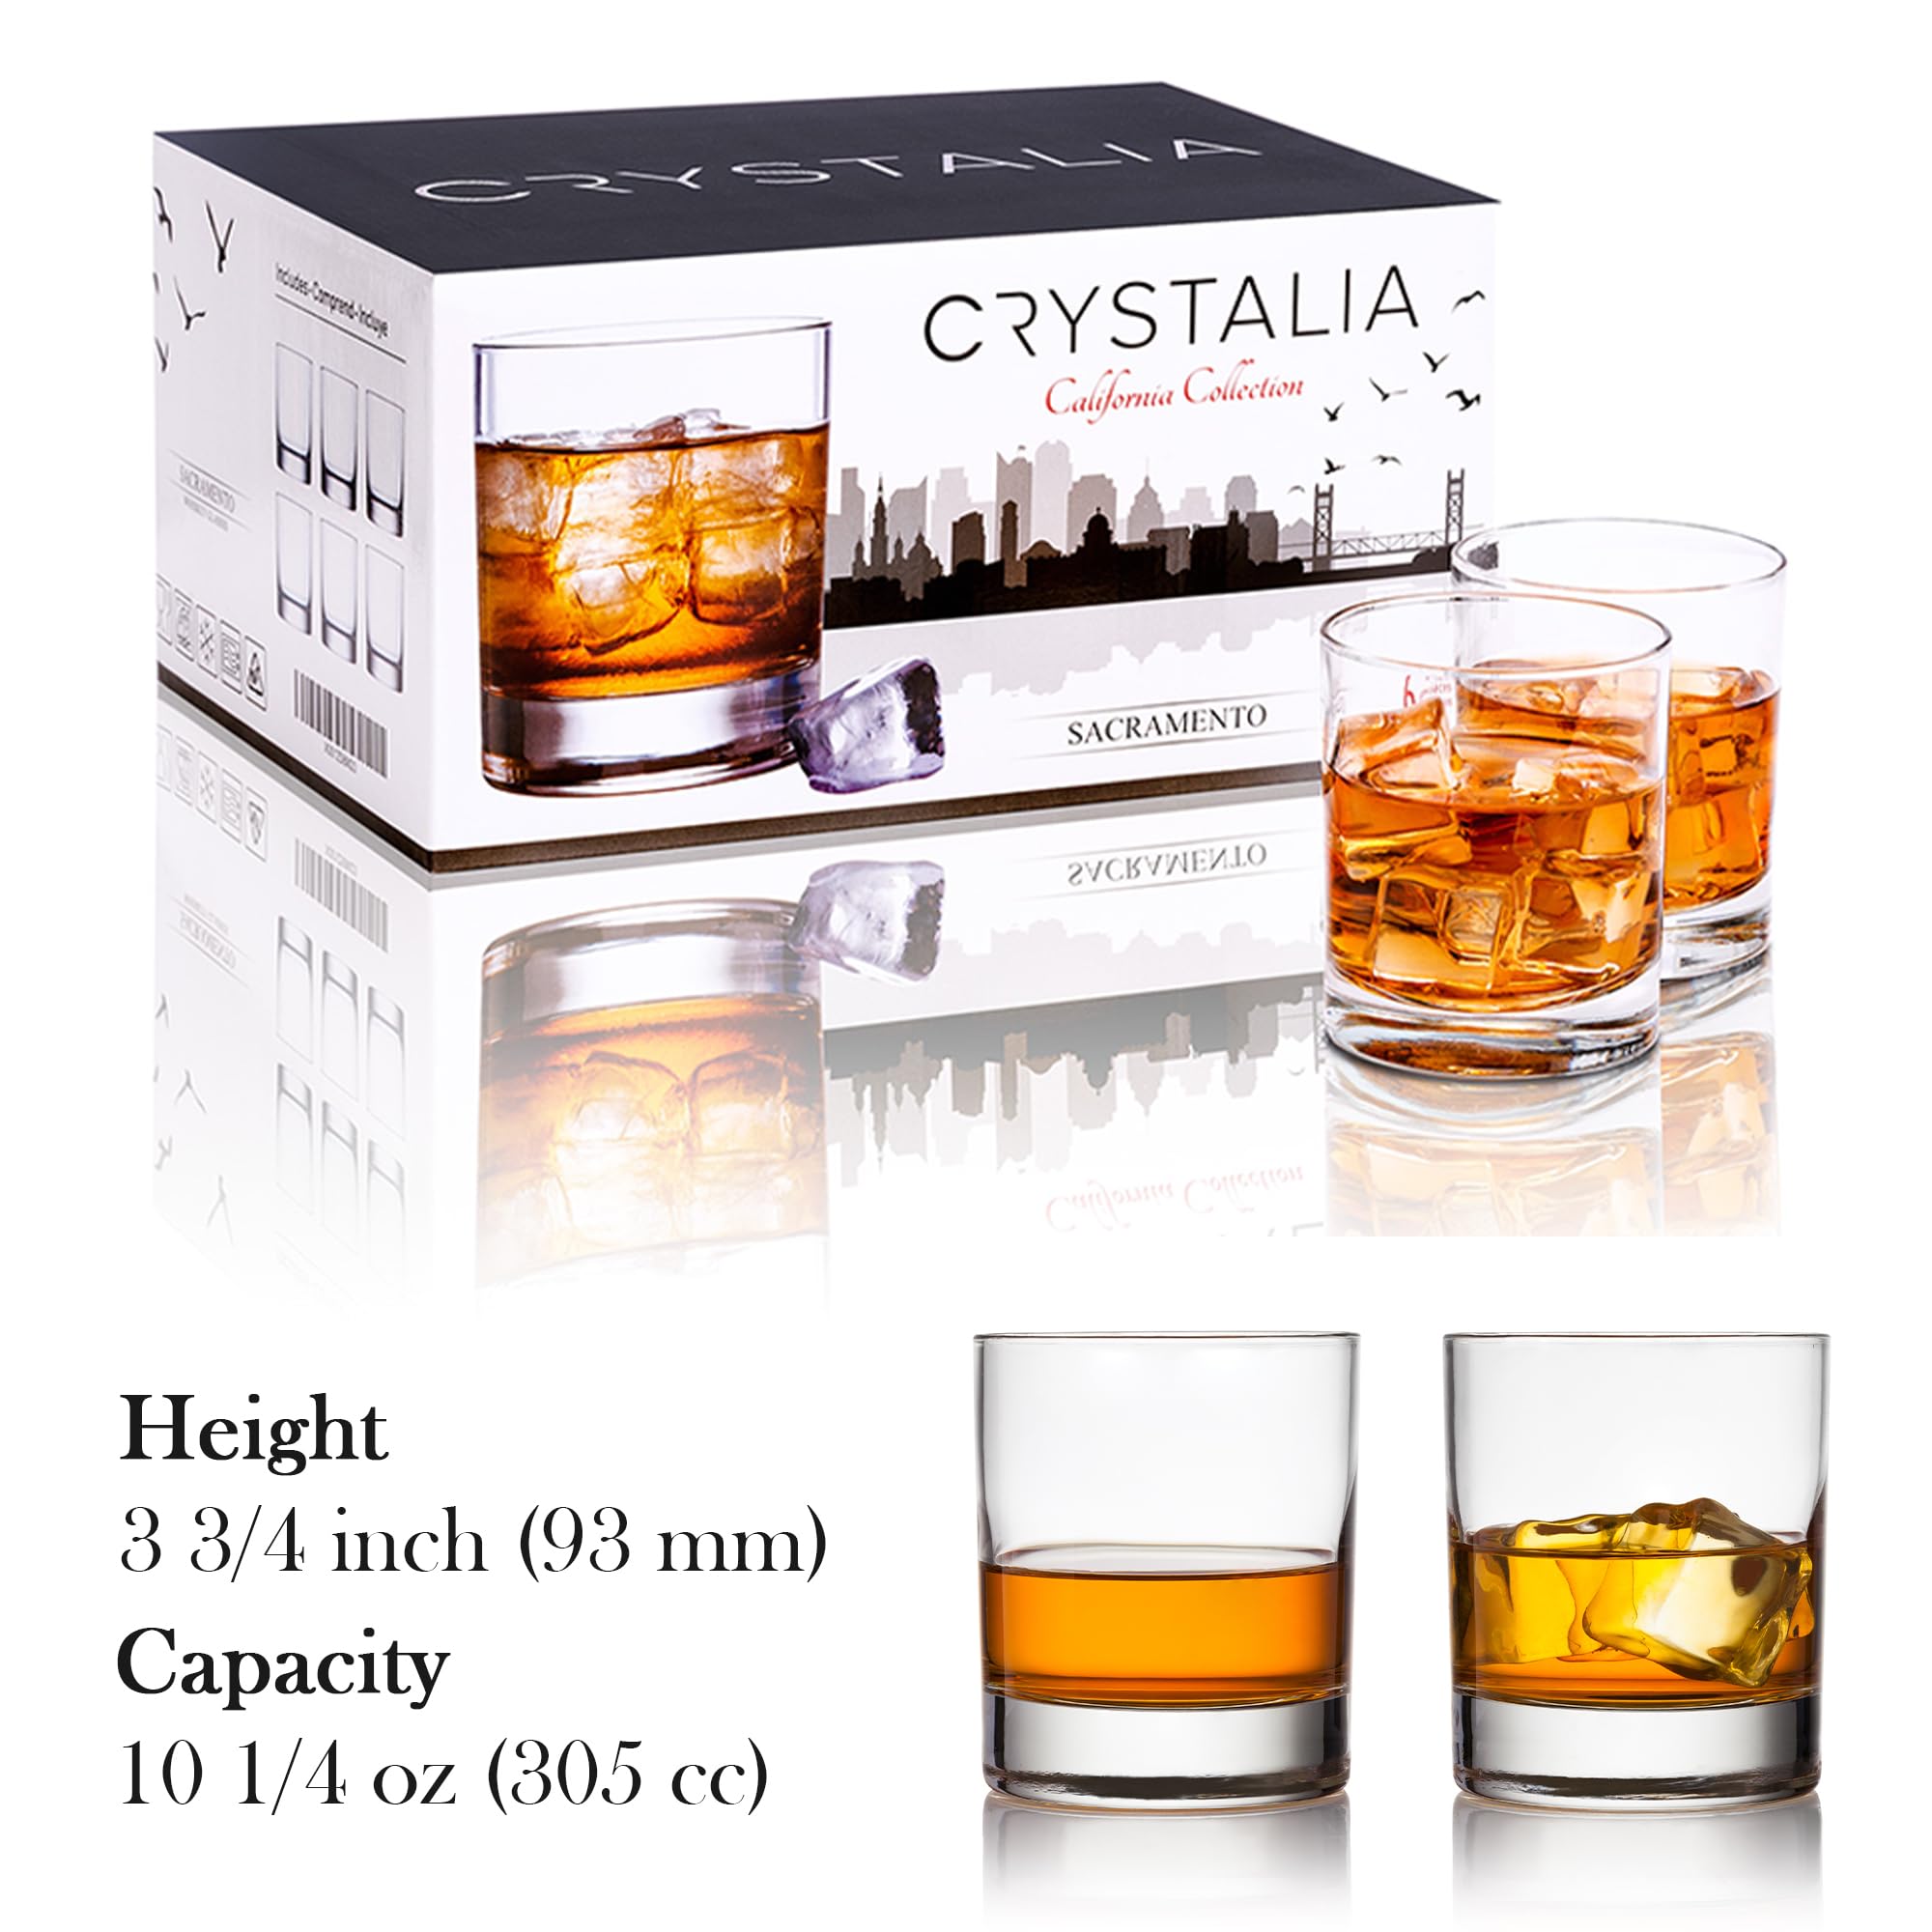 Old Fashioned Whiskey Glass Set, Premium Rocks Glasses for Cocktails and Bourbon, 10 1/4 Oz, Set of 6, Lead-Free Crystal, Bar Drinking Glass Tumbler for Scotch, Cognac, Irish Whisky